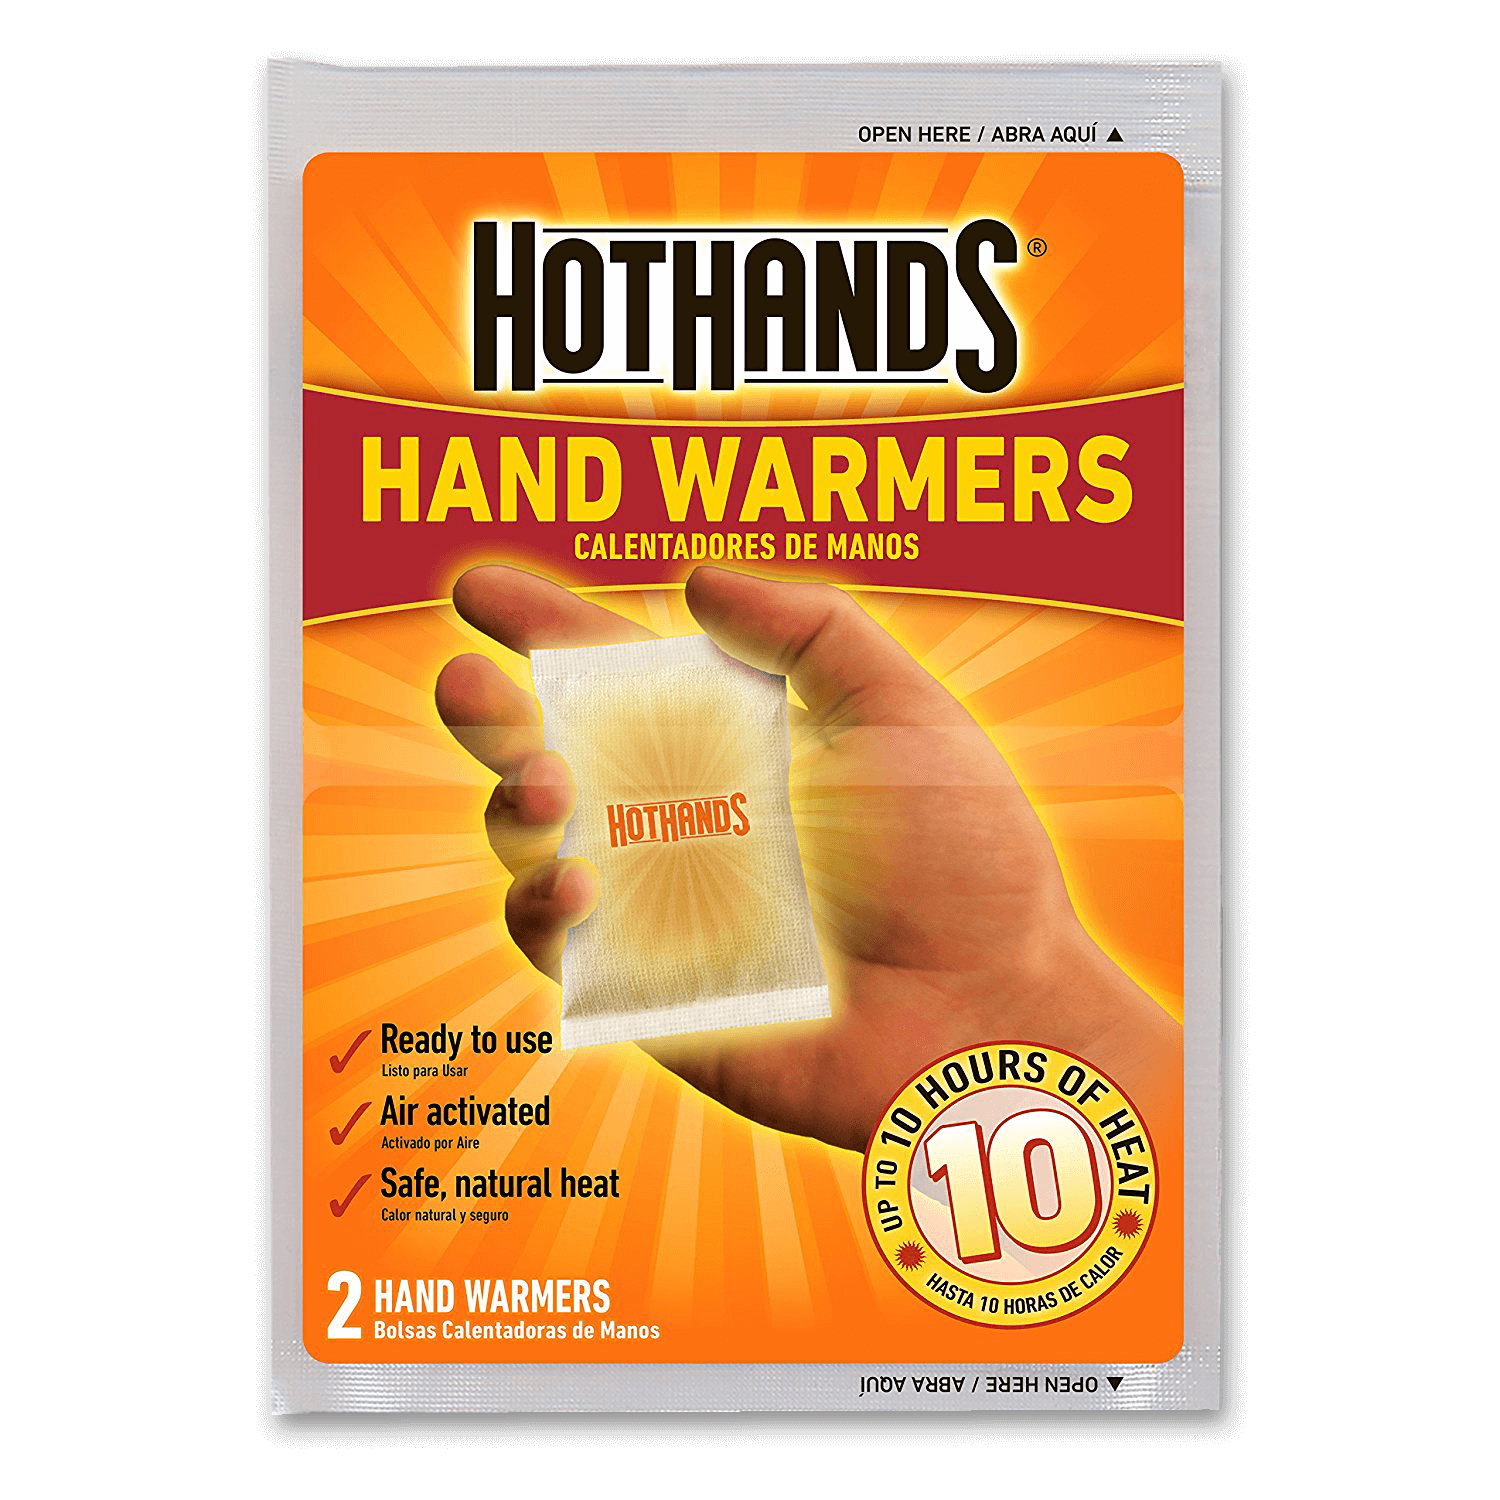 HotHands Hand & Toe Warmers